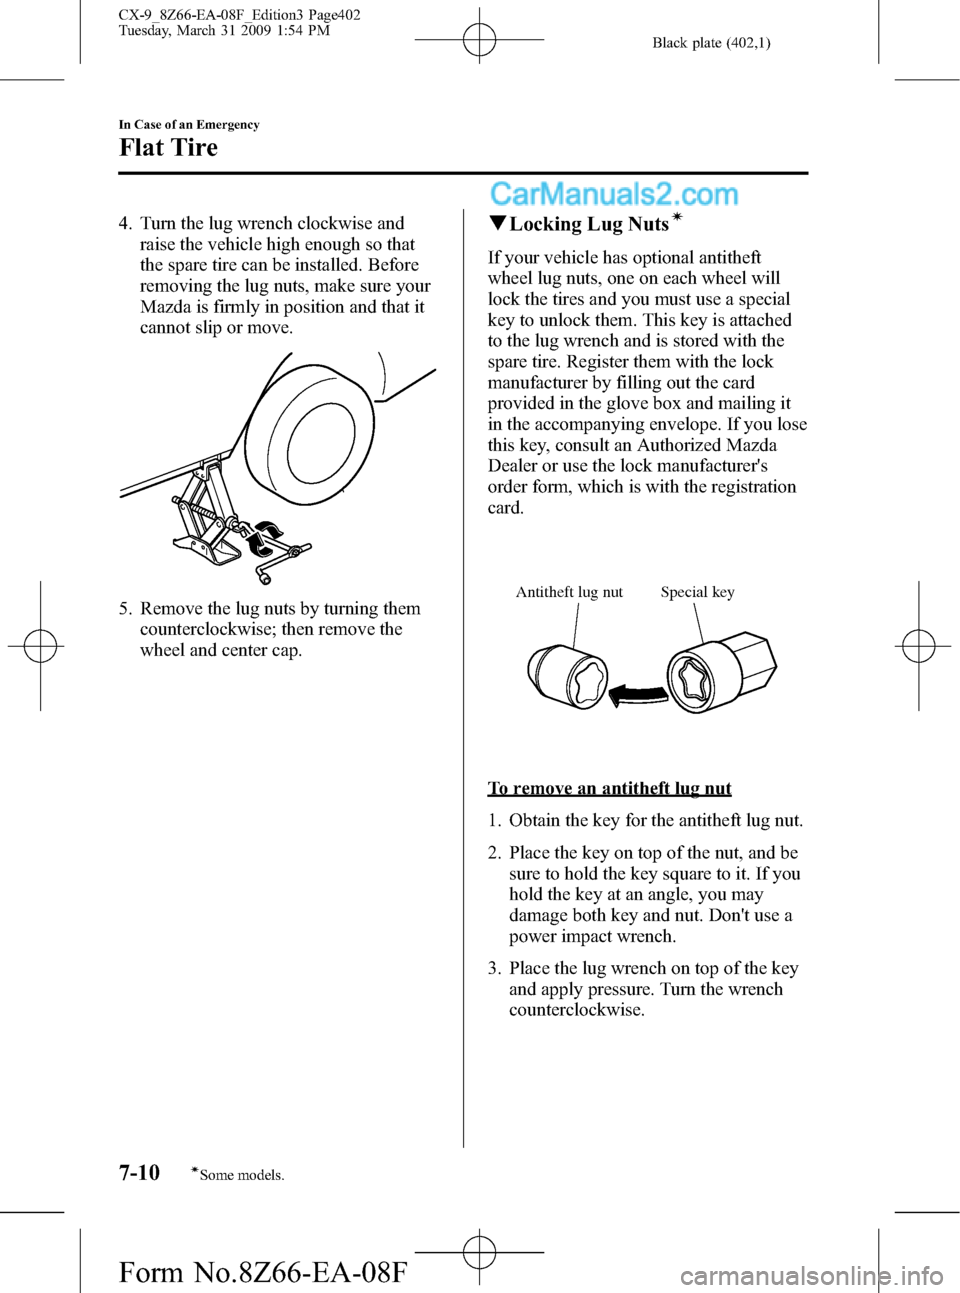 MAZDA MODEL CX-9 2009  Owners Manual (in English) Black plate (402,1)
4. Turn the lug wrench clockwise and
raise the vehicle high enough so that
the spare tire can be installed. Before
removing the lug nuts, make sure your
Mazda is firmly in position